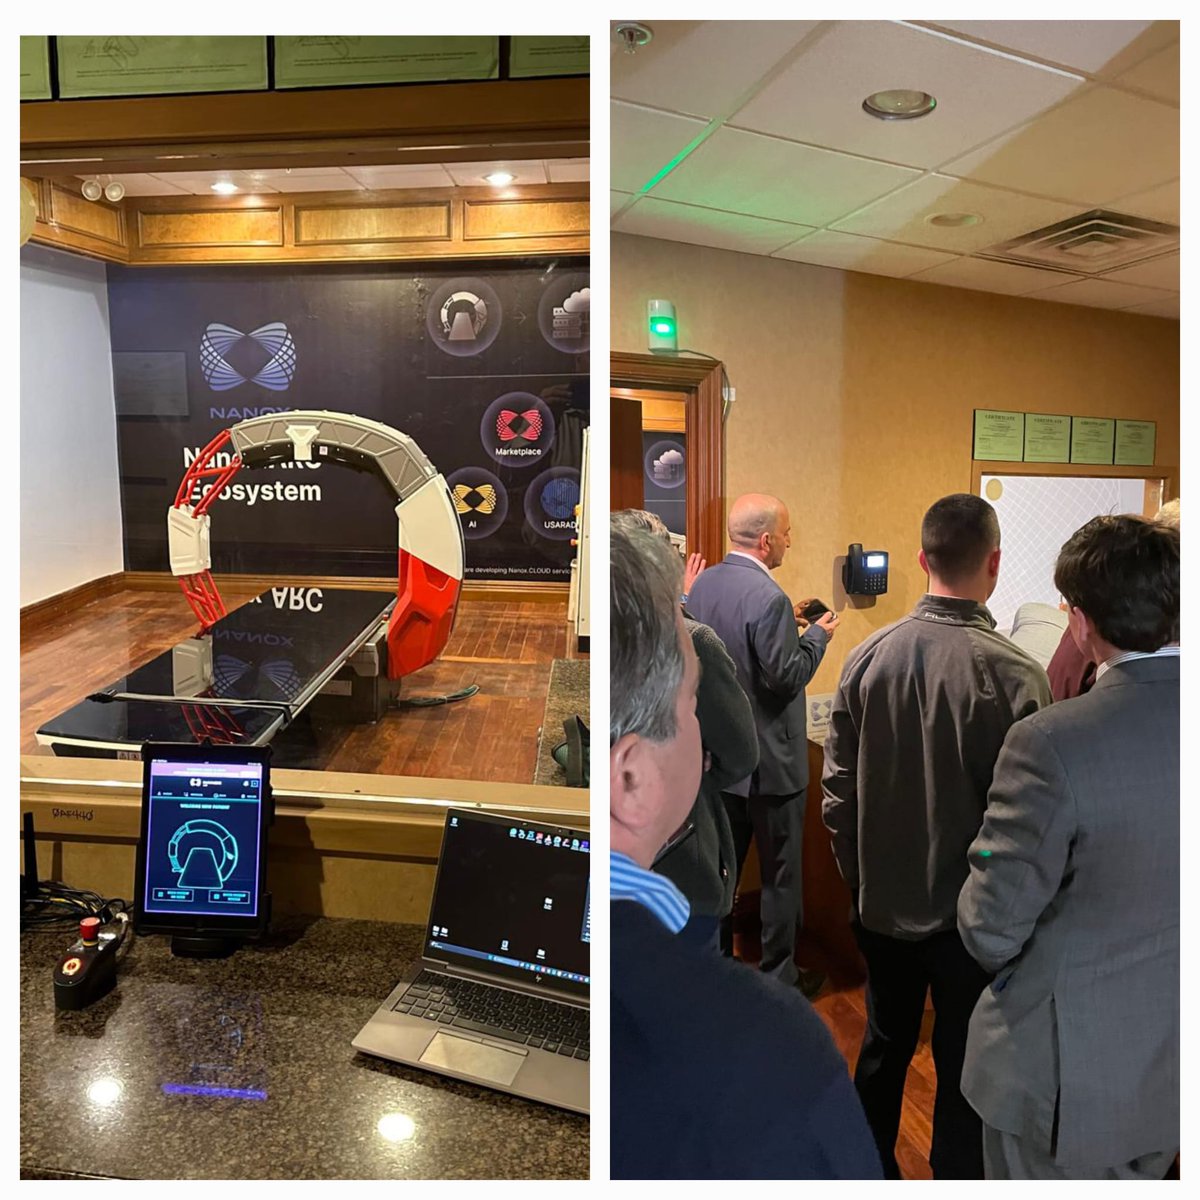 Yesterday we hosted an in-person live demonstration of the Nanox.ARC system on a patient as part of our investor event at Dynamic Medical Imaging in New Jersey. Investors observed the entire patient scanning flow with Nanox.ARC. Thank you to all who attended the event.